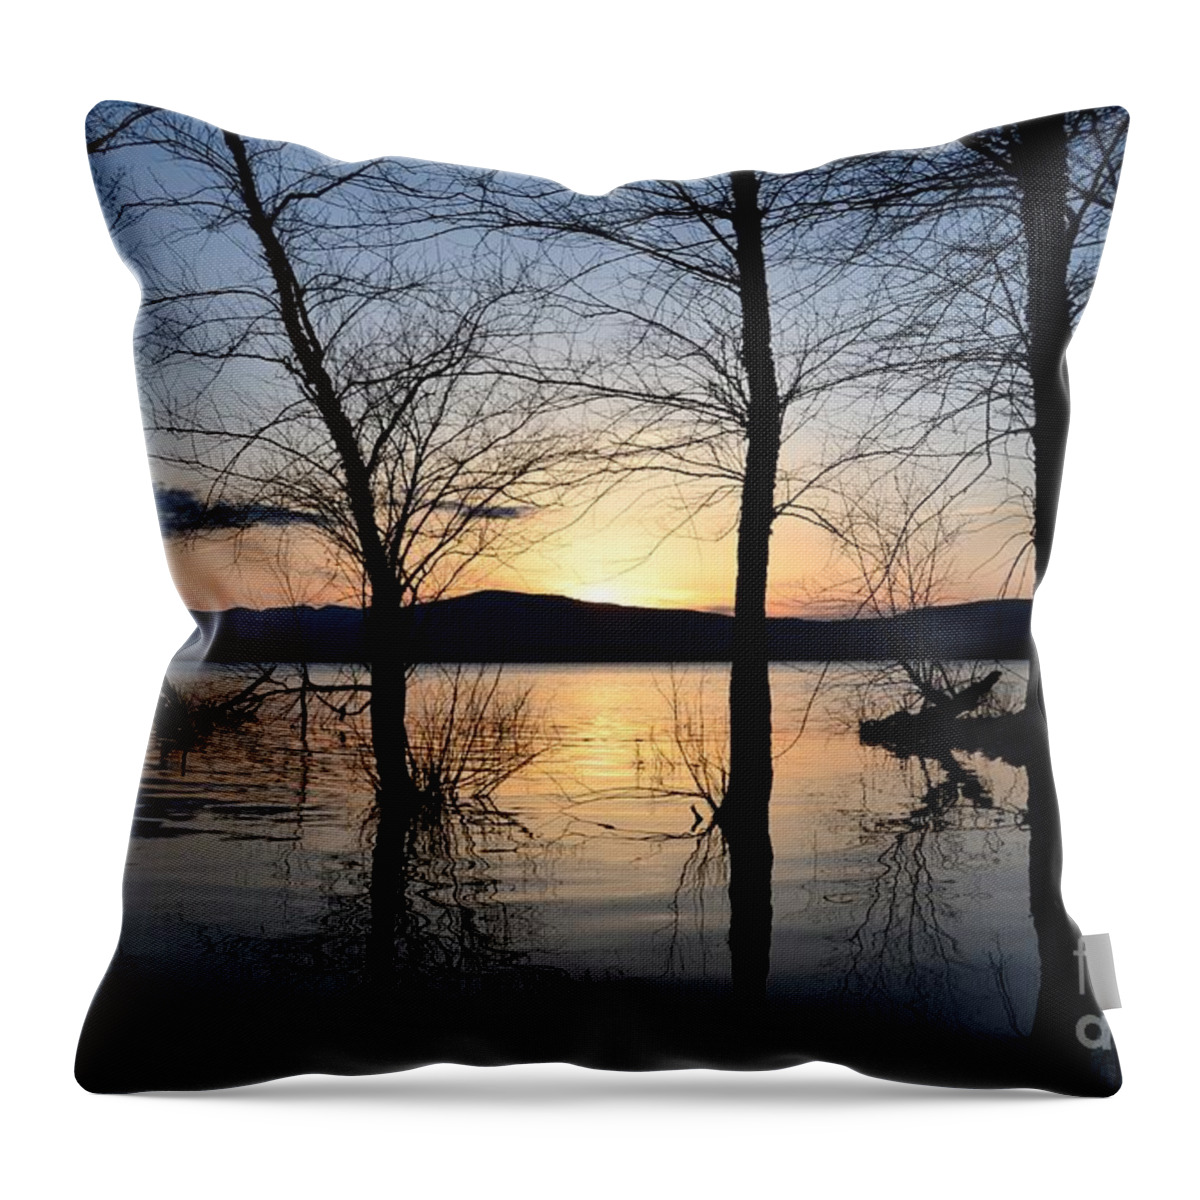 Water Throw Pillow featuring the photograph Ashokan Reservoir 43 by Cassie Marie Photography